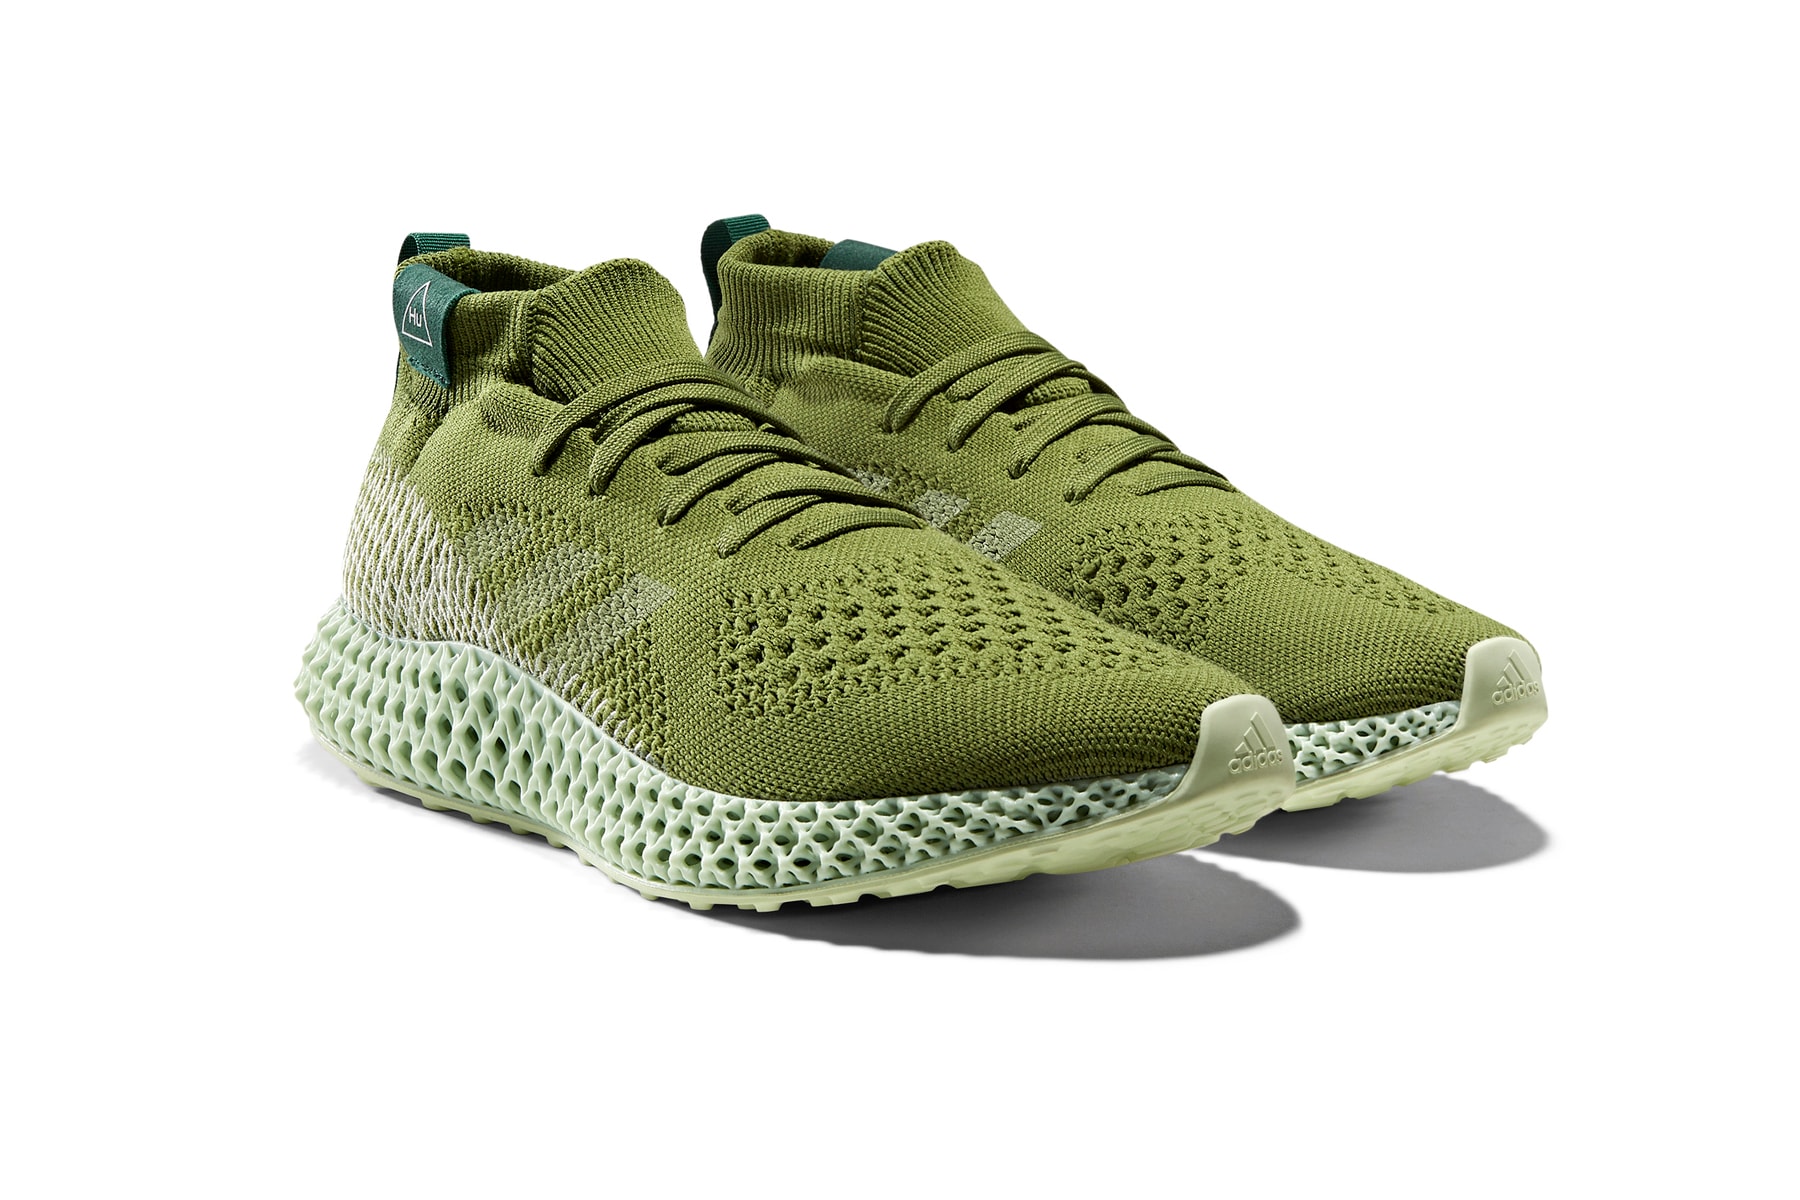 adidas Originals Pharrell Williams 4D Runner Release Info collaborations footwear sneakers 3d printing active purple tech olive 